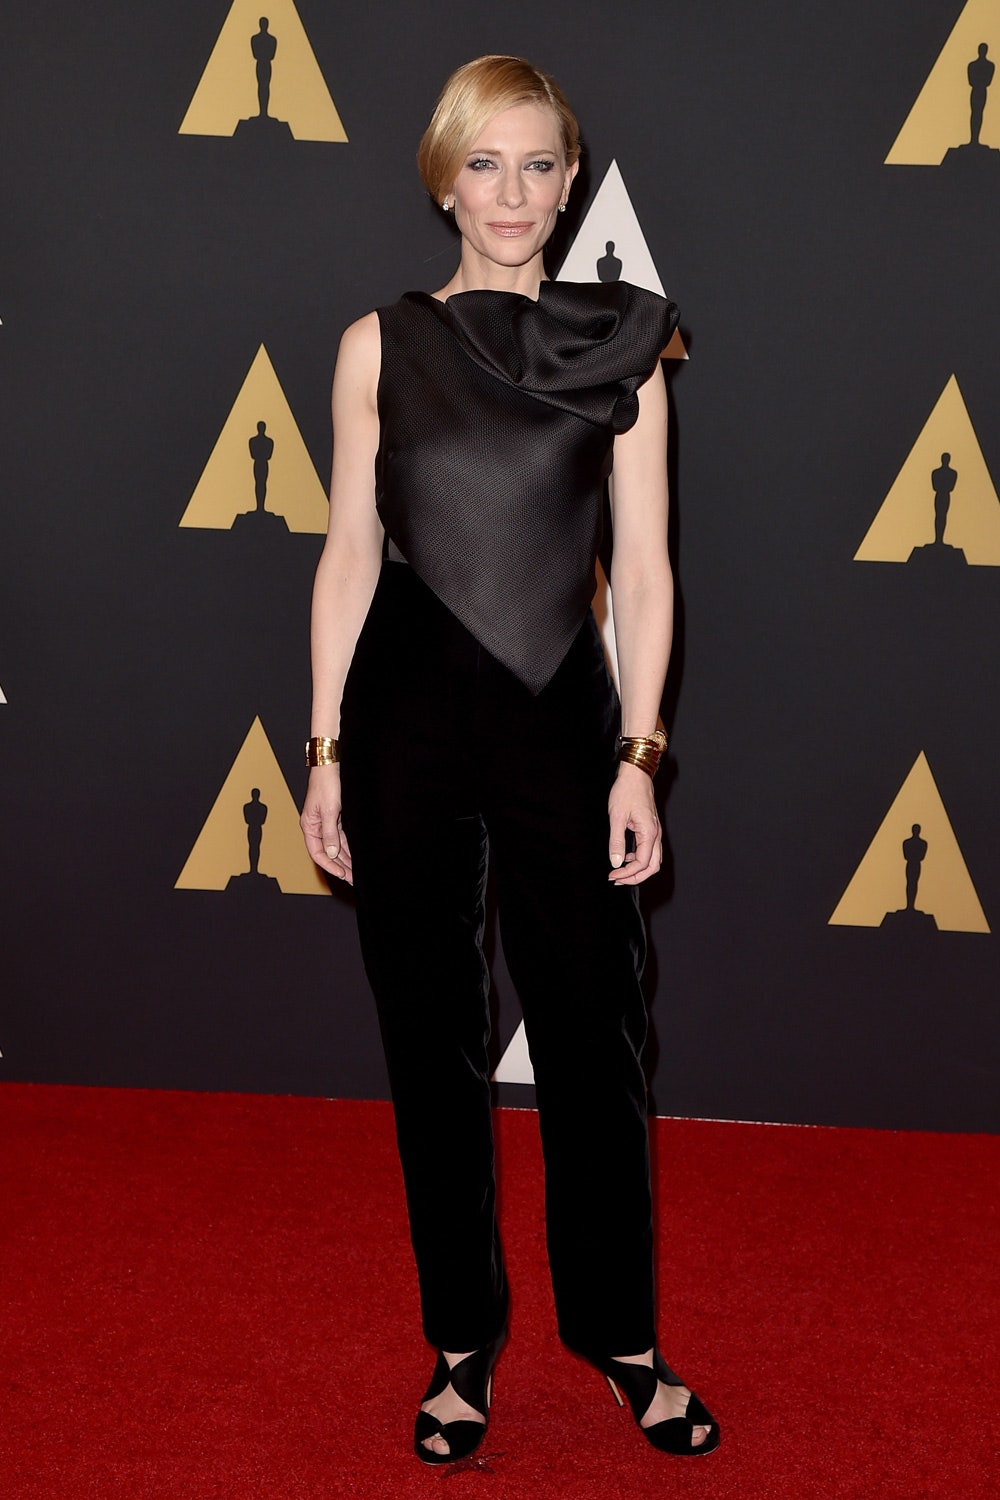 Governors Awards 2015